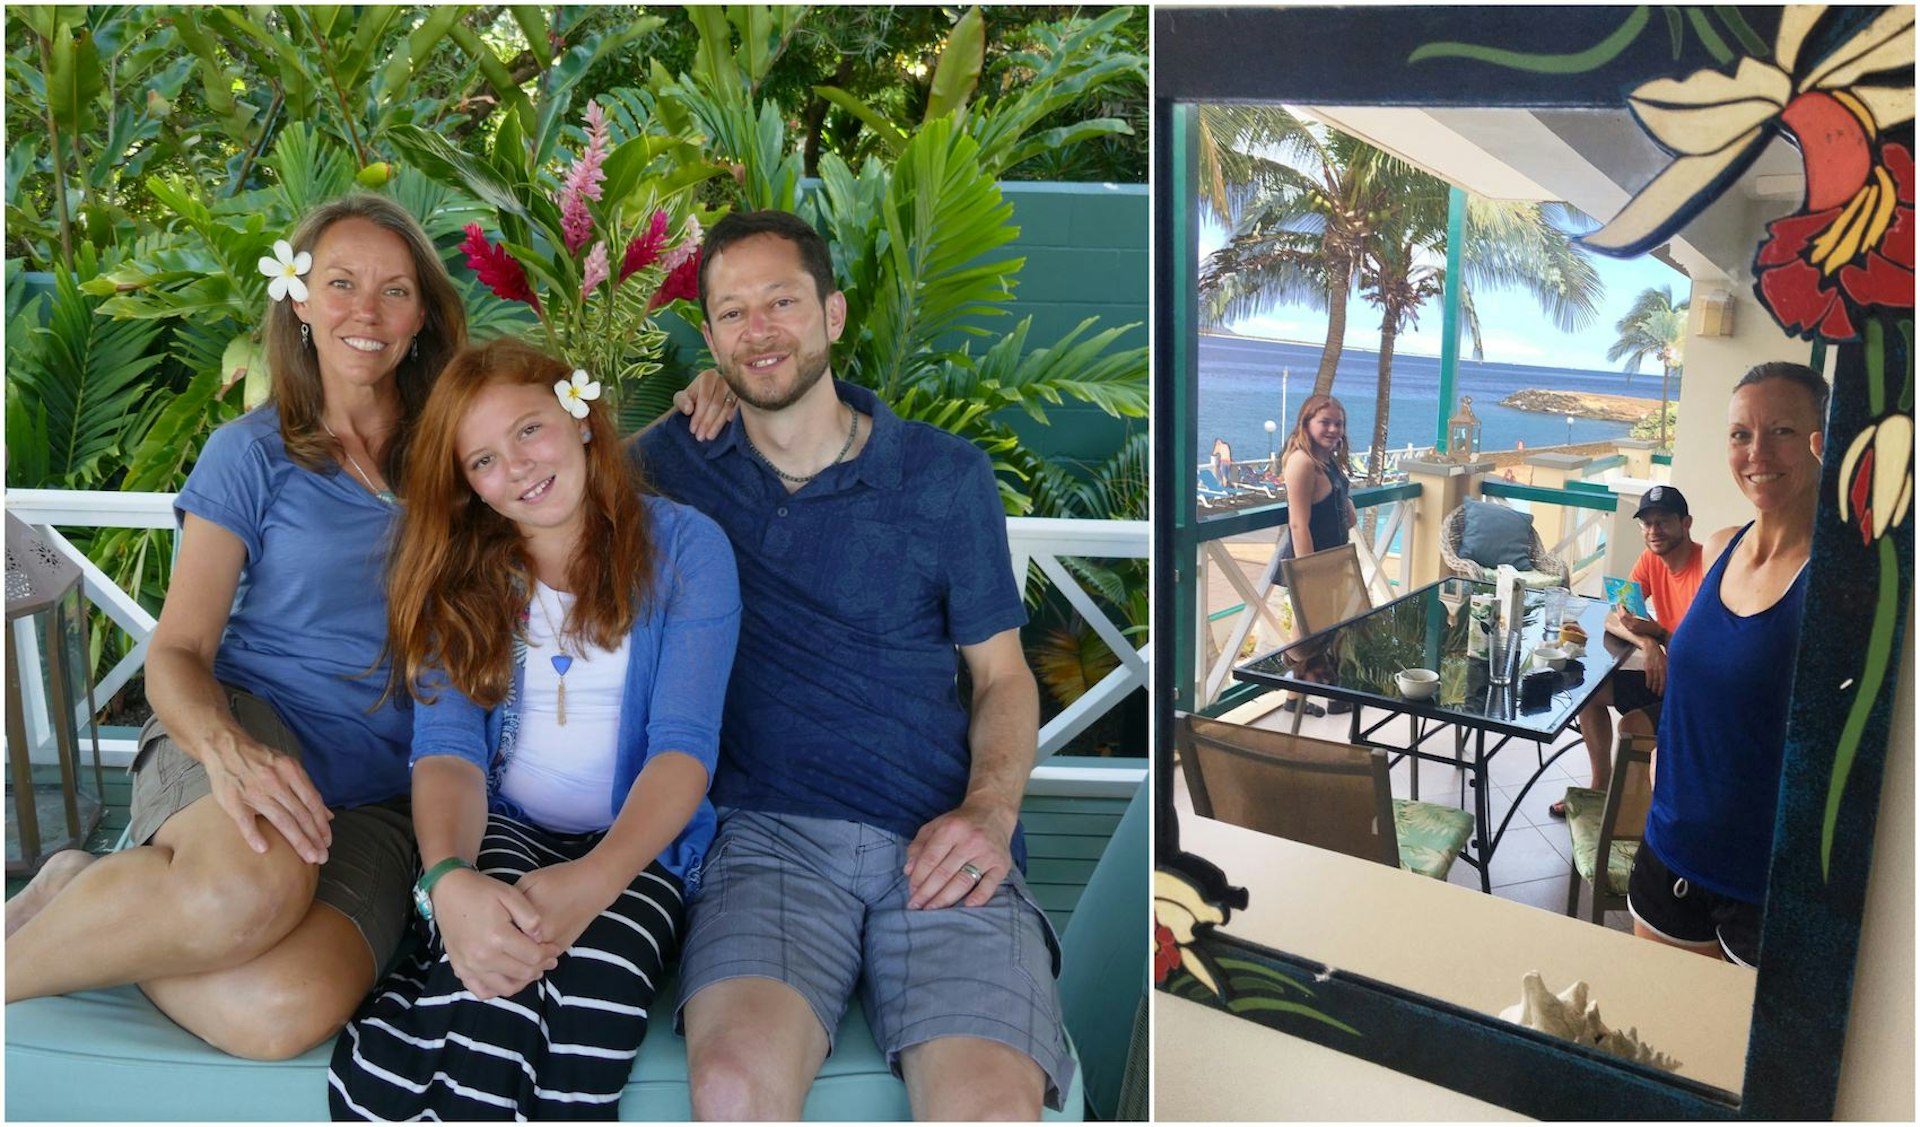 Ryan Wolffe from Colorado has swapped his family home for one in Kauai, Hawaii (left with wife Michelle and daughter Kyla) and another in Bonaire (right).